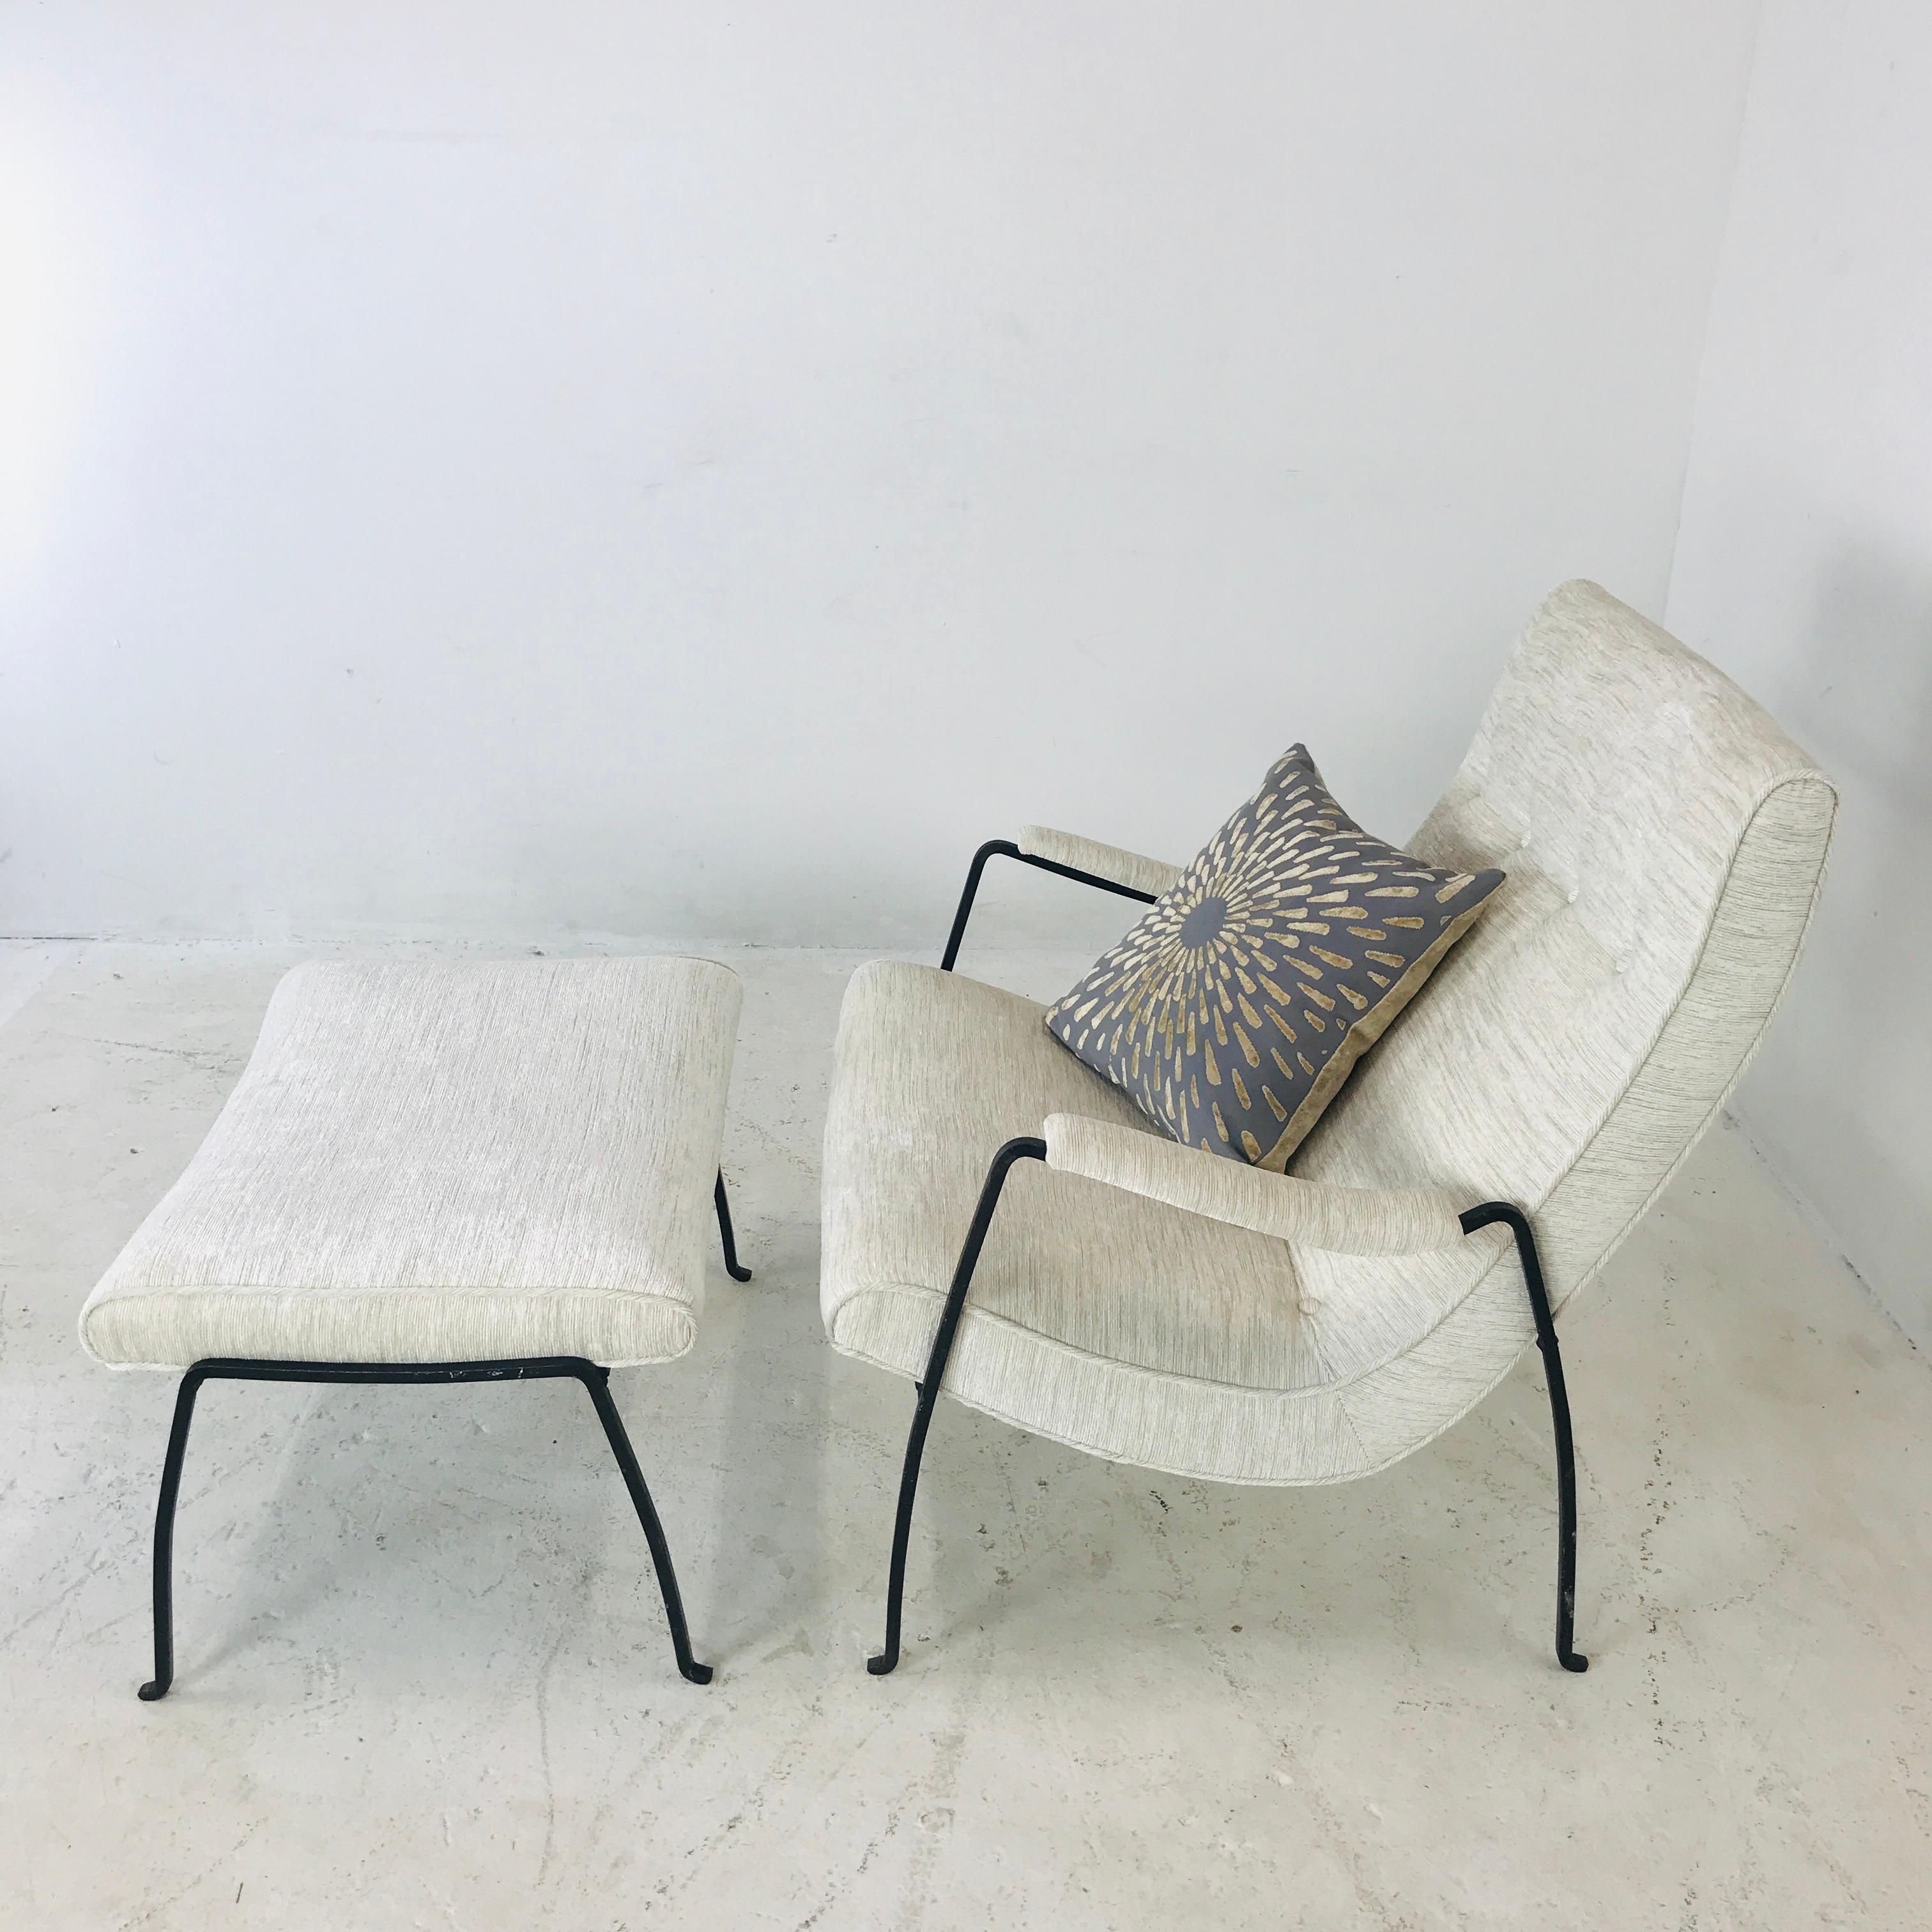 Mid-20th Century Iron Framed Lounge Chair and Ottoman by Milo Baughman for Pacifica Iron Works